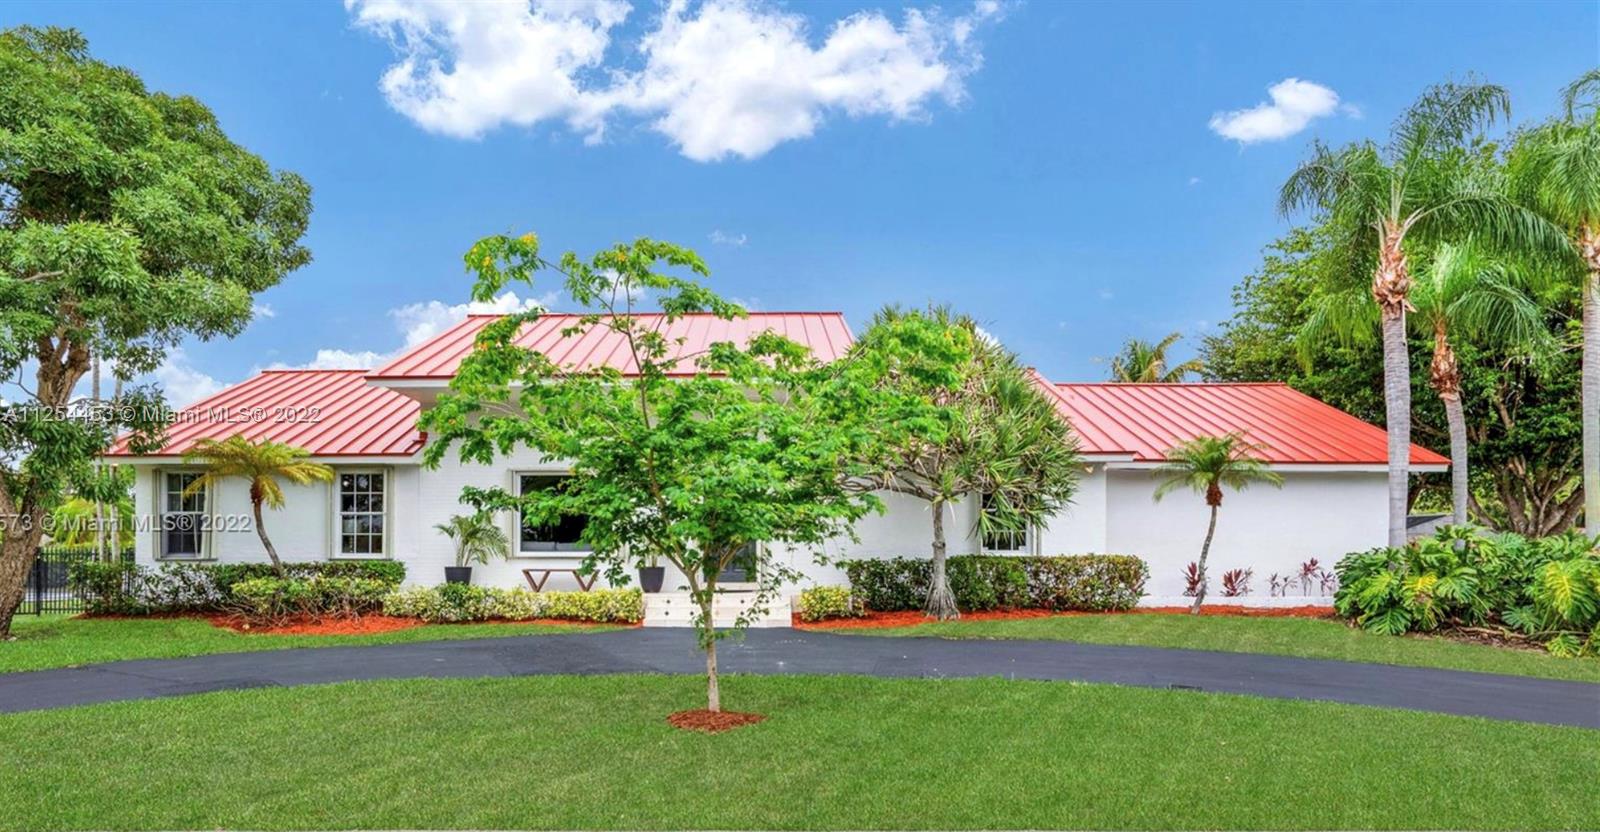 Beautiful house in Palmetto Bay.  High ceilings, hurricane shutters, marble floors, 3/2 split  bedroom plus den and separate living, dining and family.   This is a quiet neighborhood with great public and private schools.